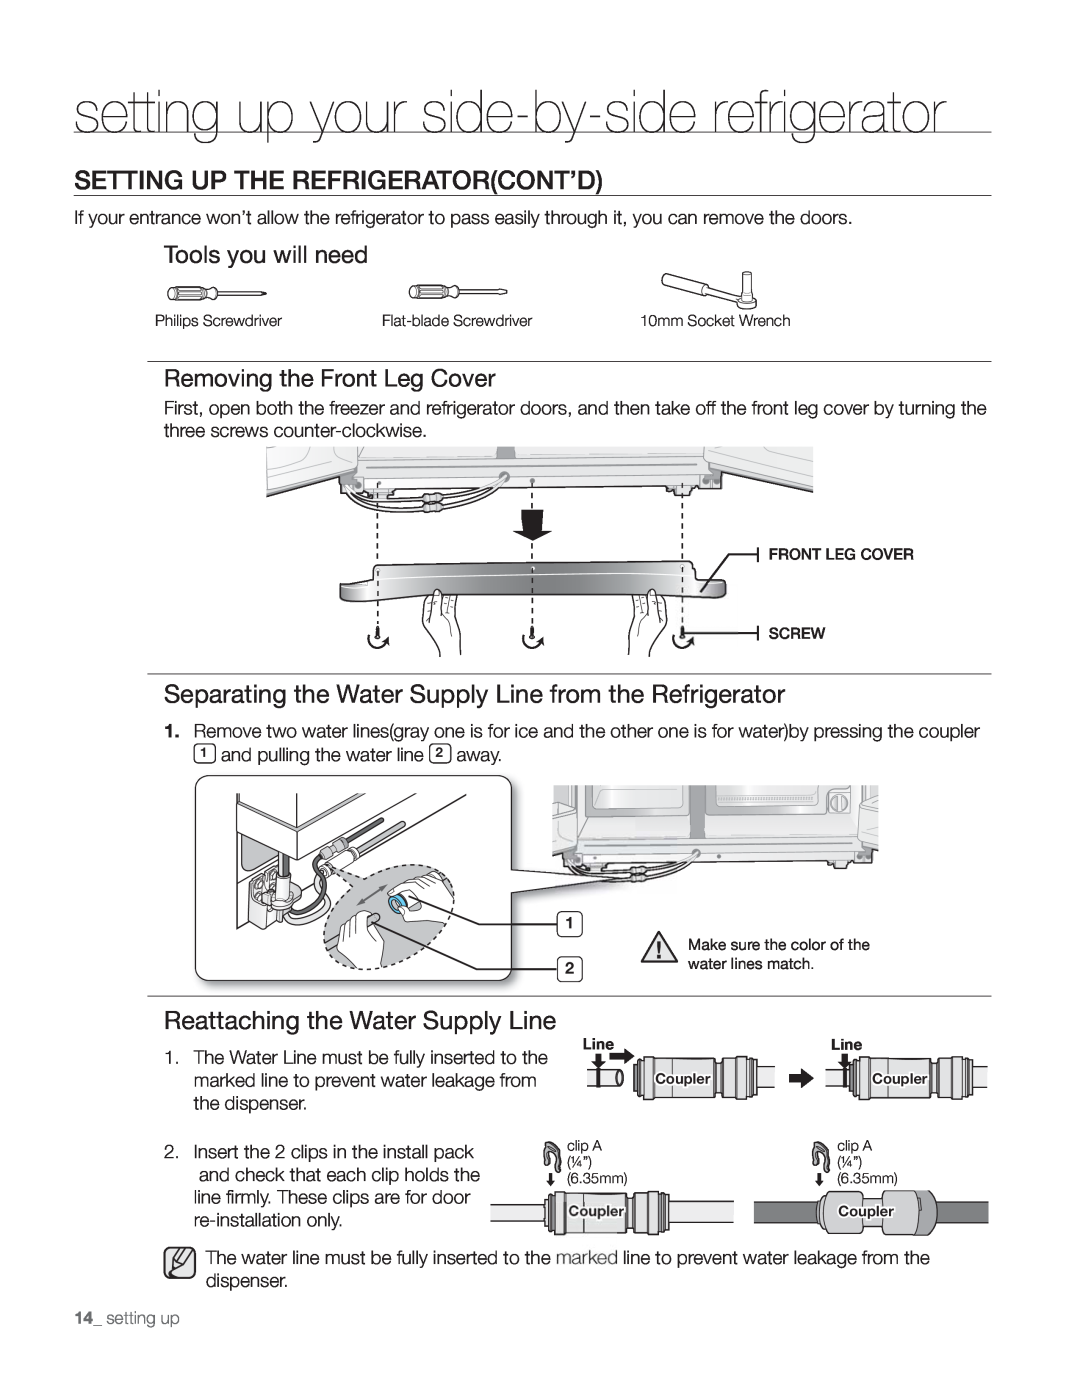 Samsung DA68-01890Q user manual Setting Up The Refrigeratorcont’D, Reattaching the Water Supply Line 